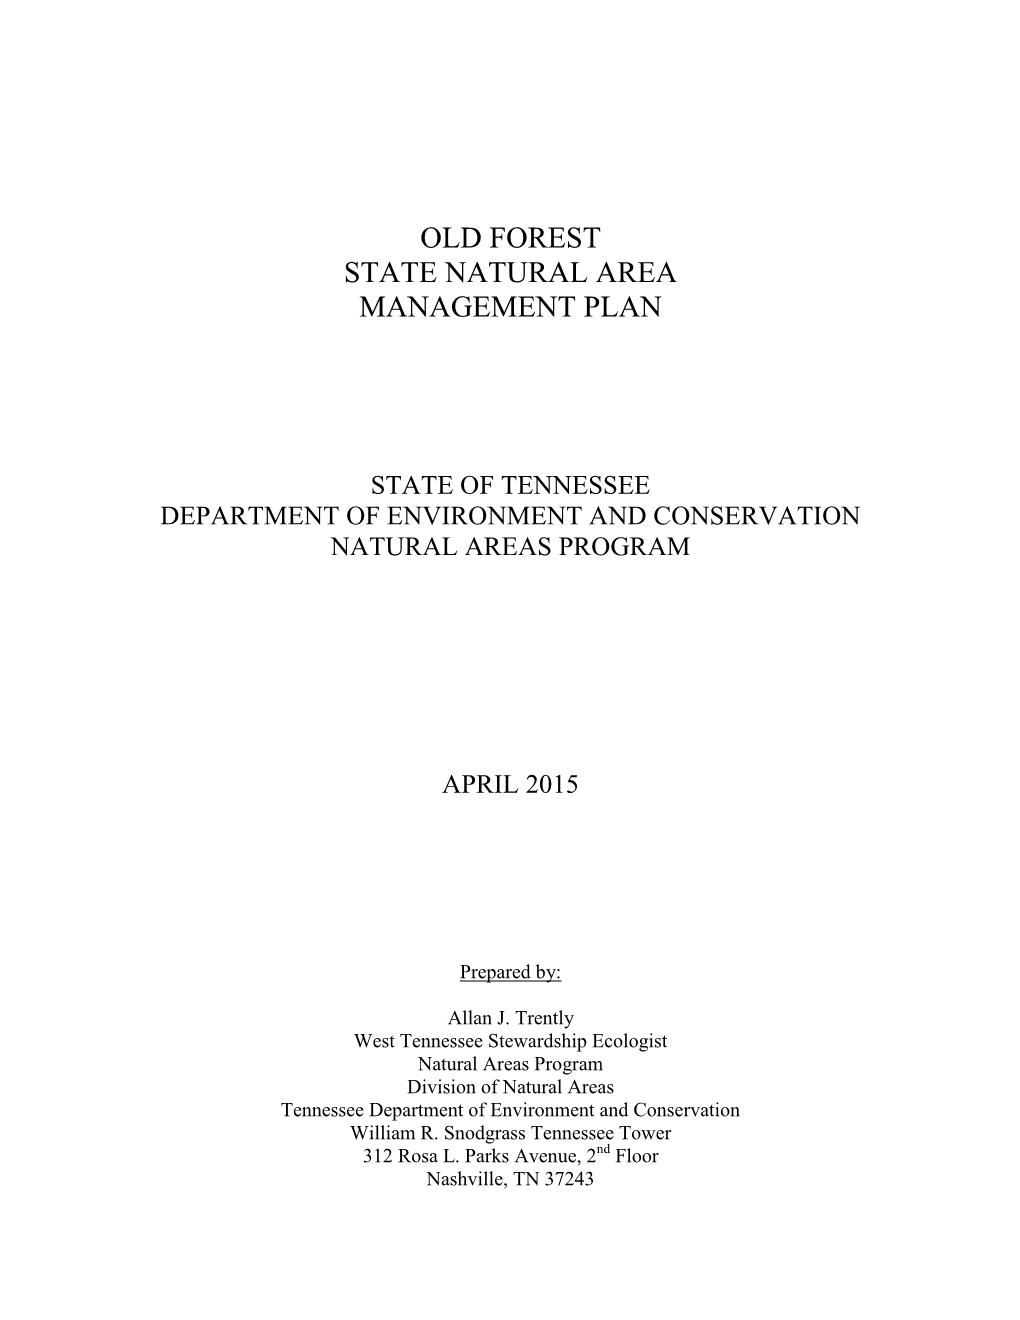 State Natural Area Management Plan